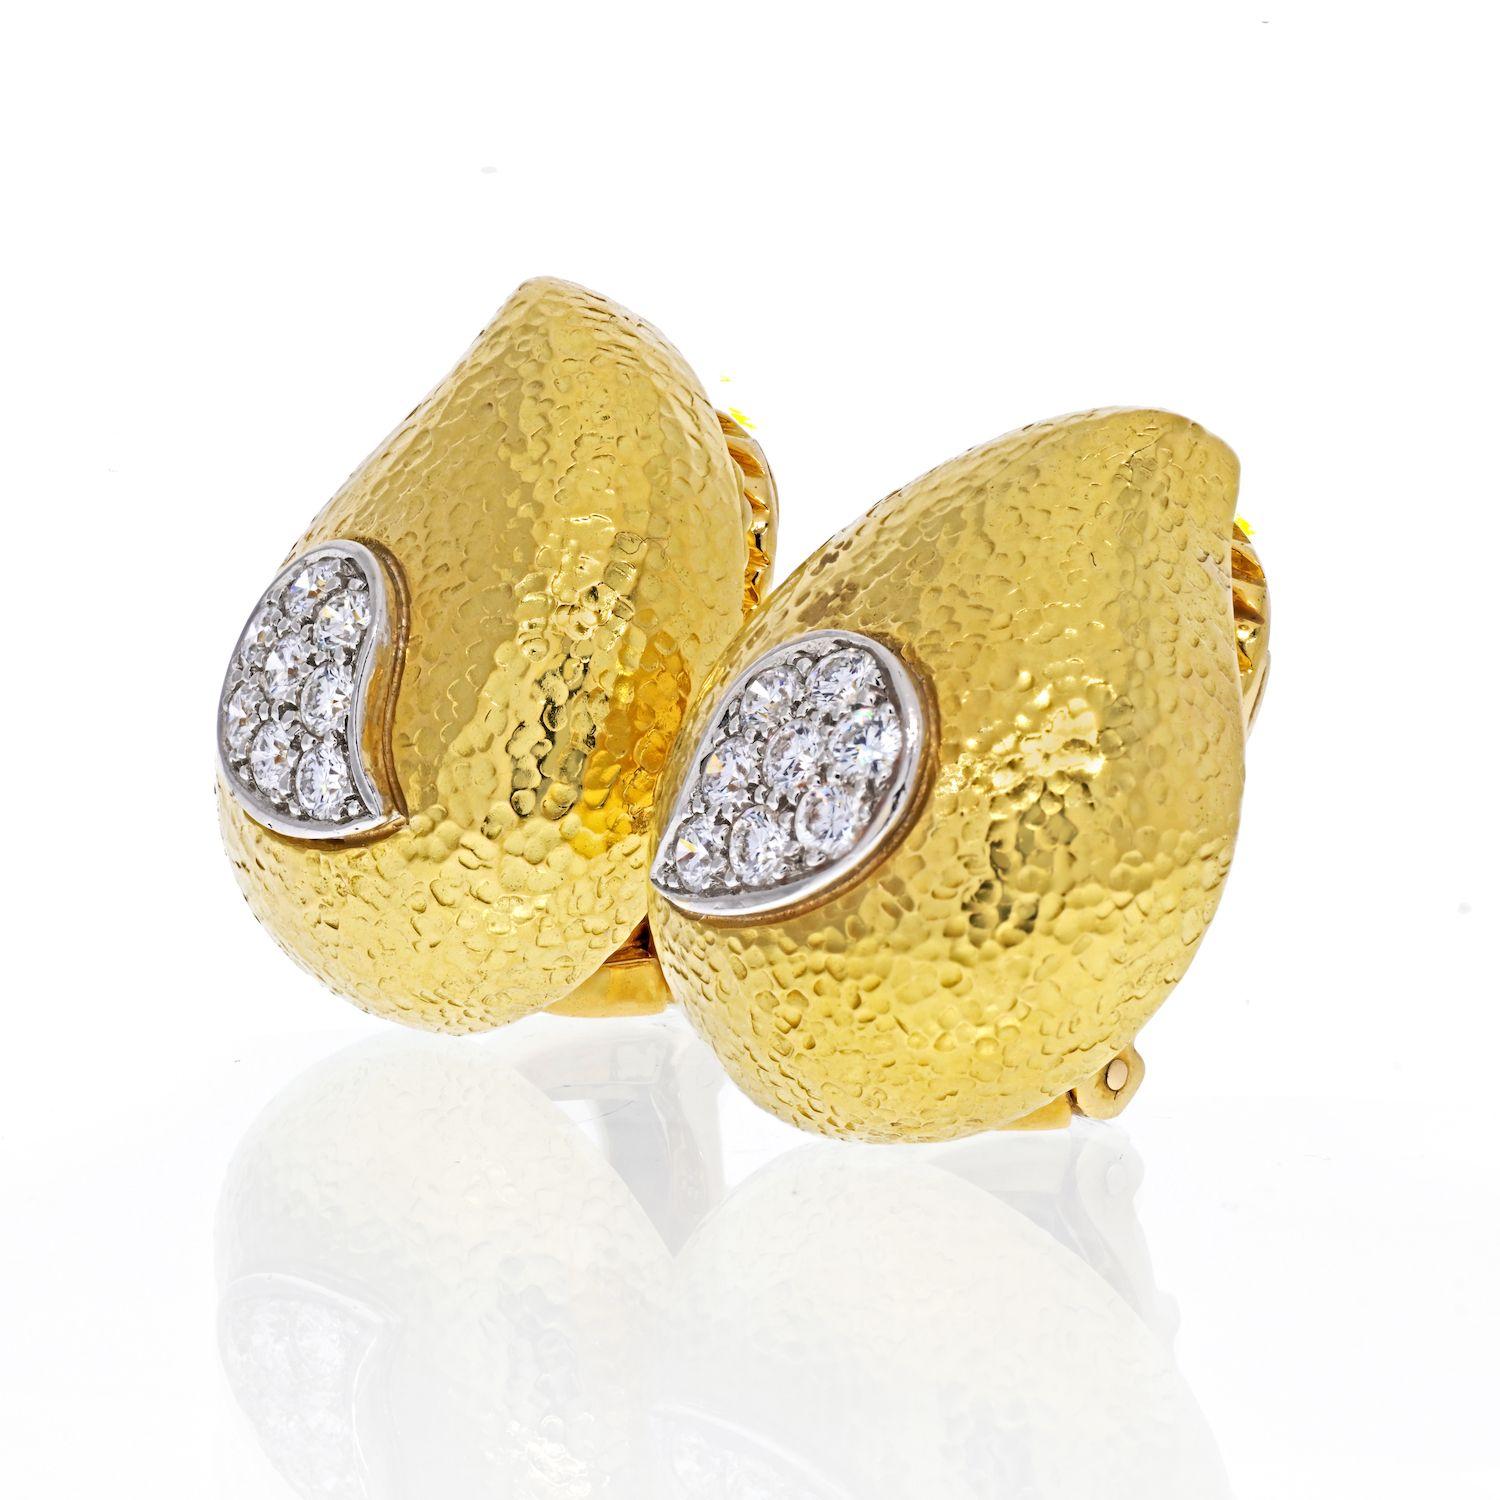 David Webb 18k yellow gold teardrop stud earrings. Features hammered yellow gold and a teardrop design with just a touch of round brilliant cut diamonds. 
Length: 25mm
Width: 20mm (at it's widest)
Wide and heavy omega backing. 
Posts can be added